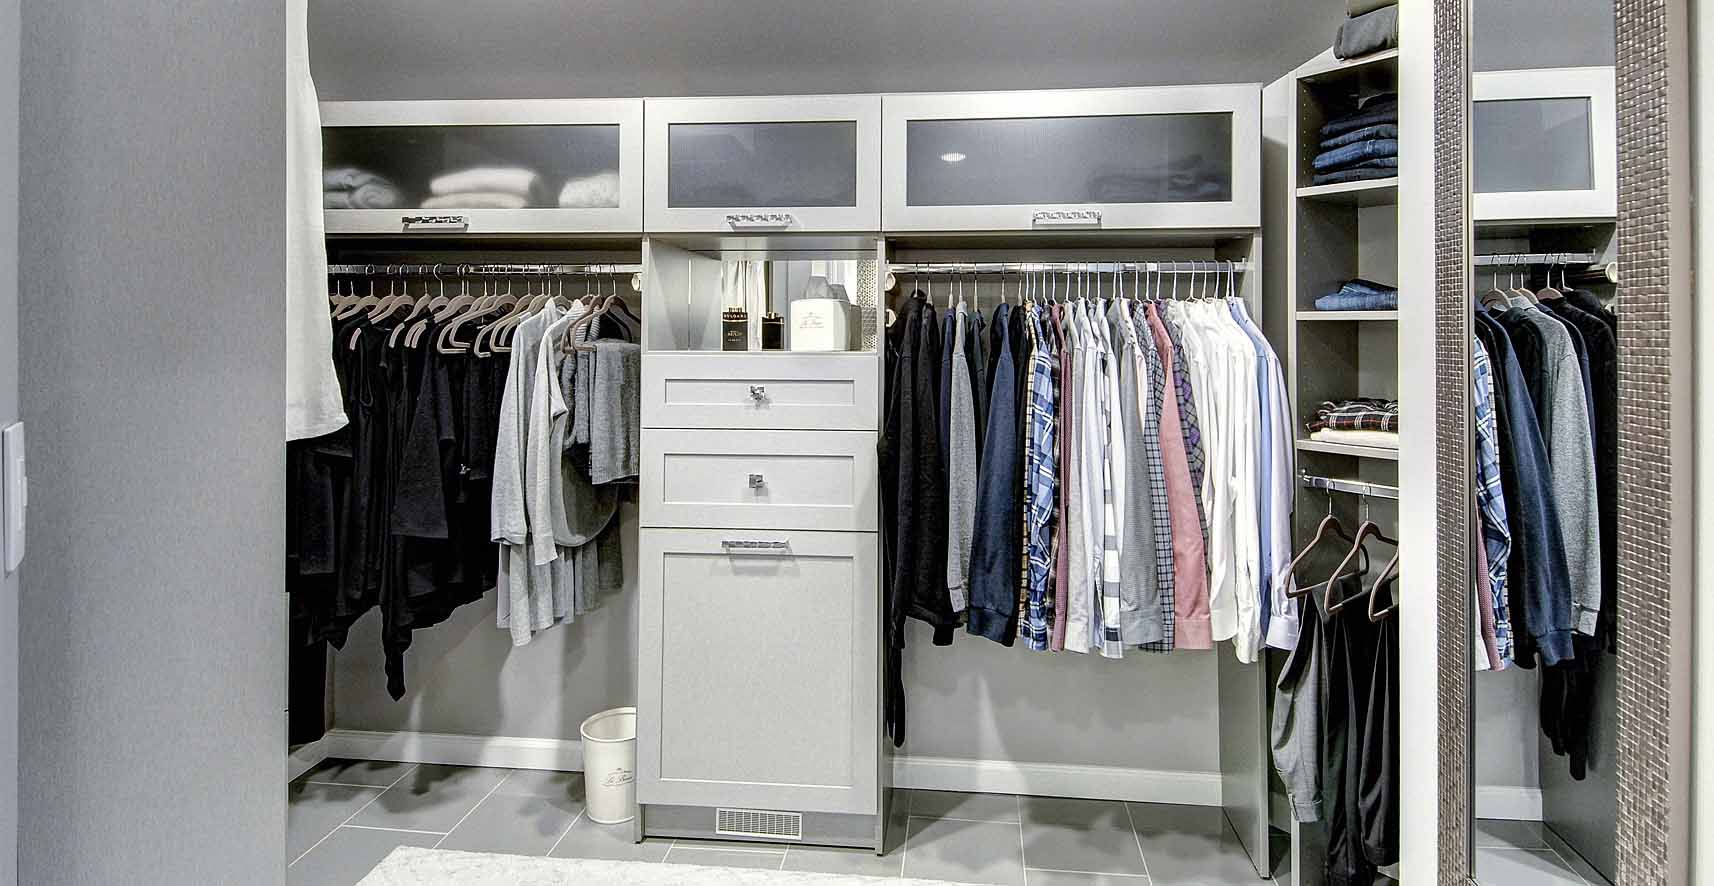 Organized clothes stored in walk in closet system